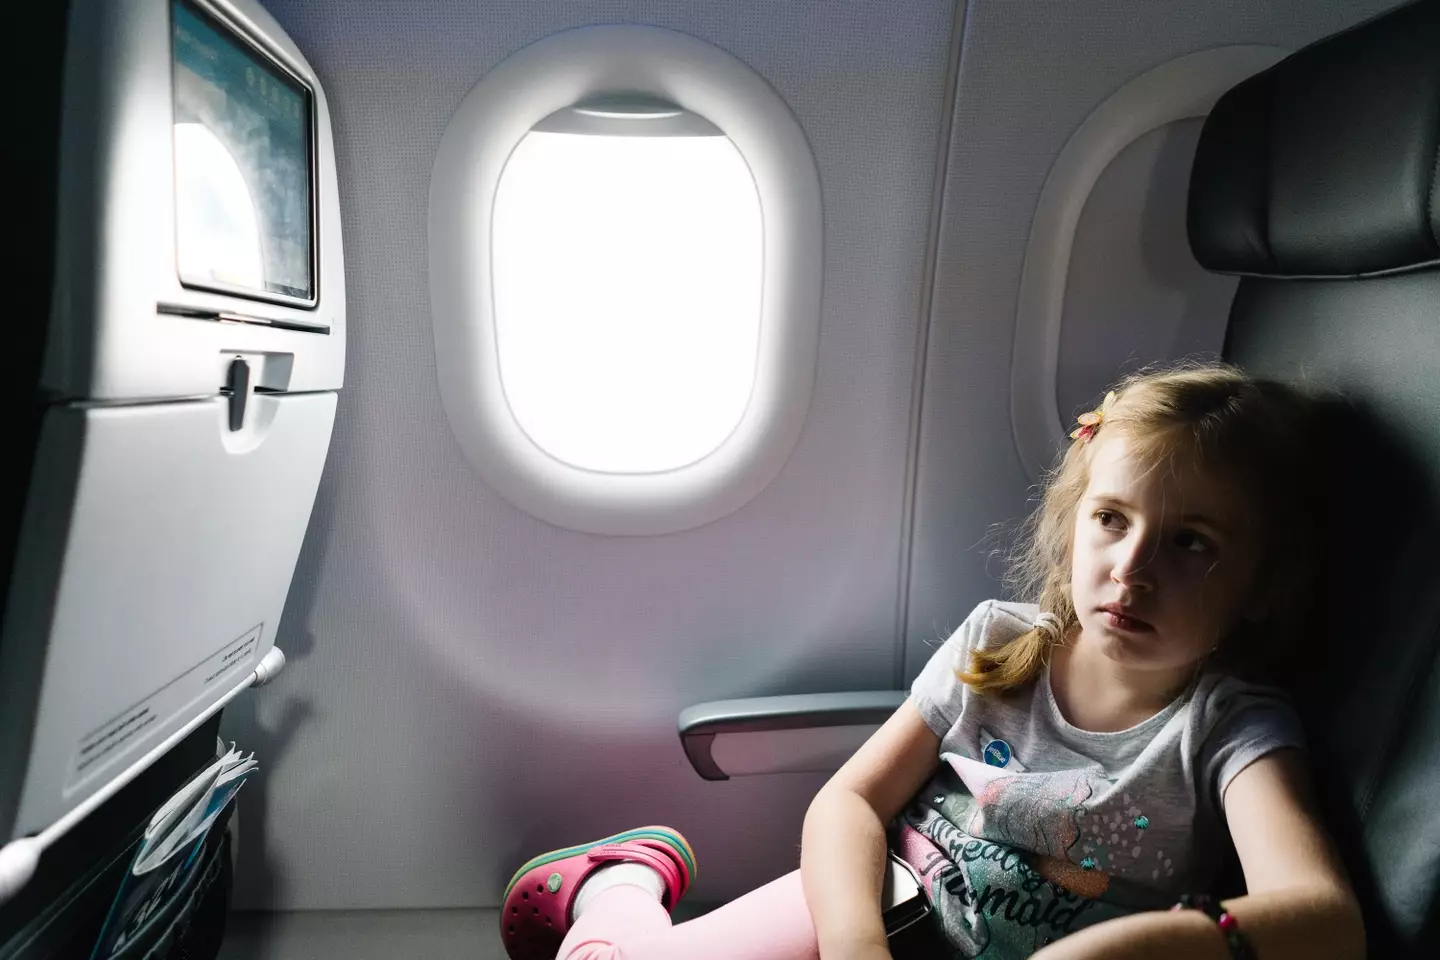 A mum was shocked after being sat away from her daughter on a flight.